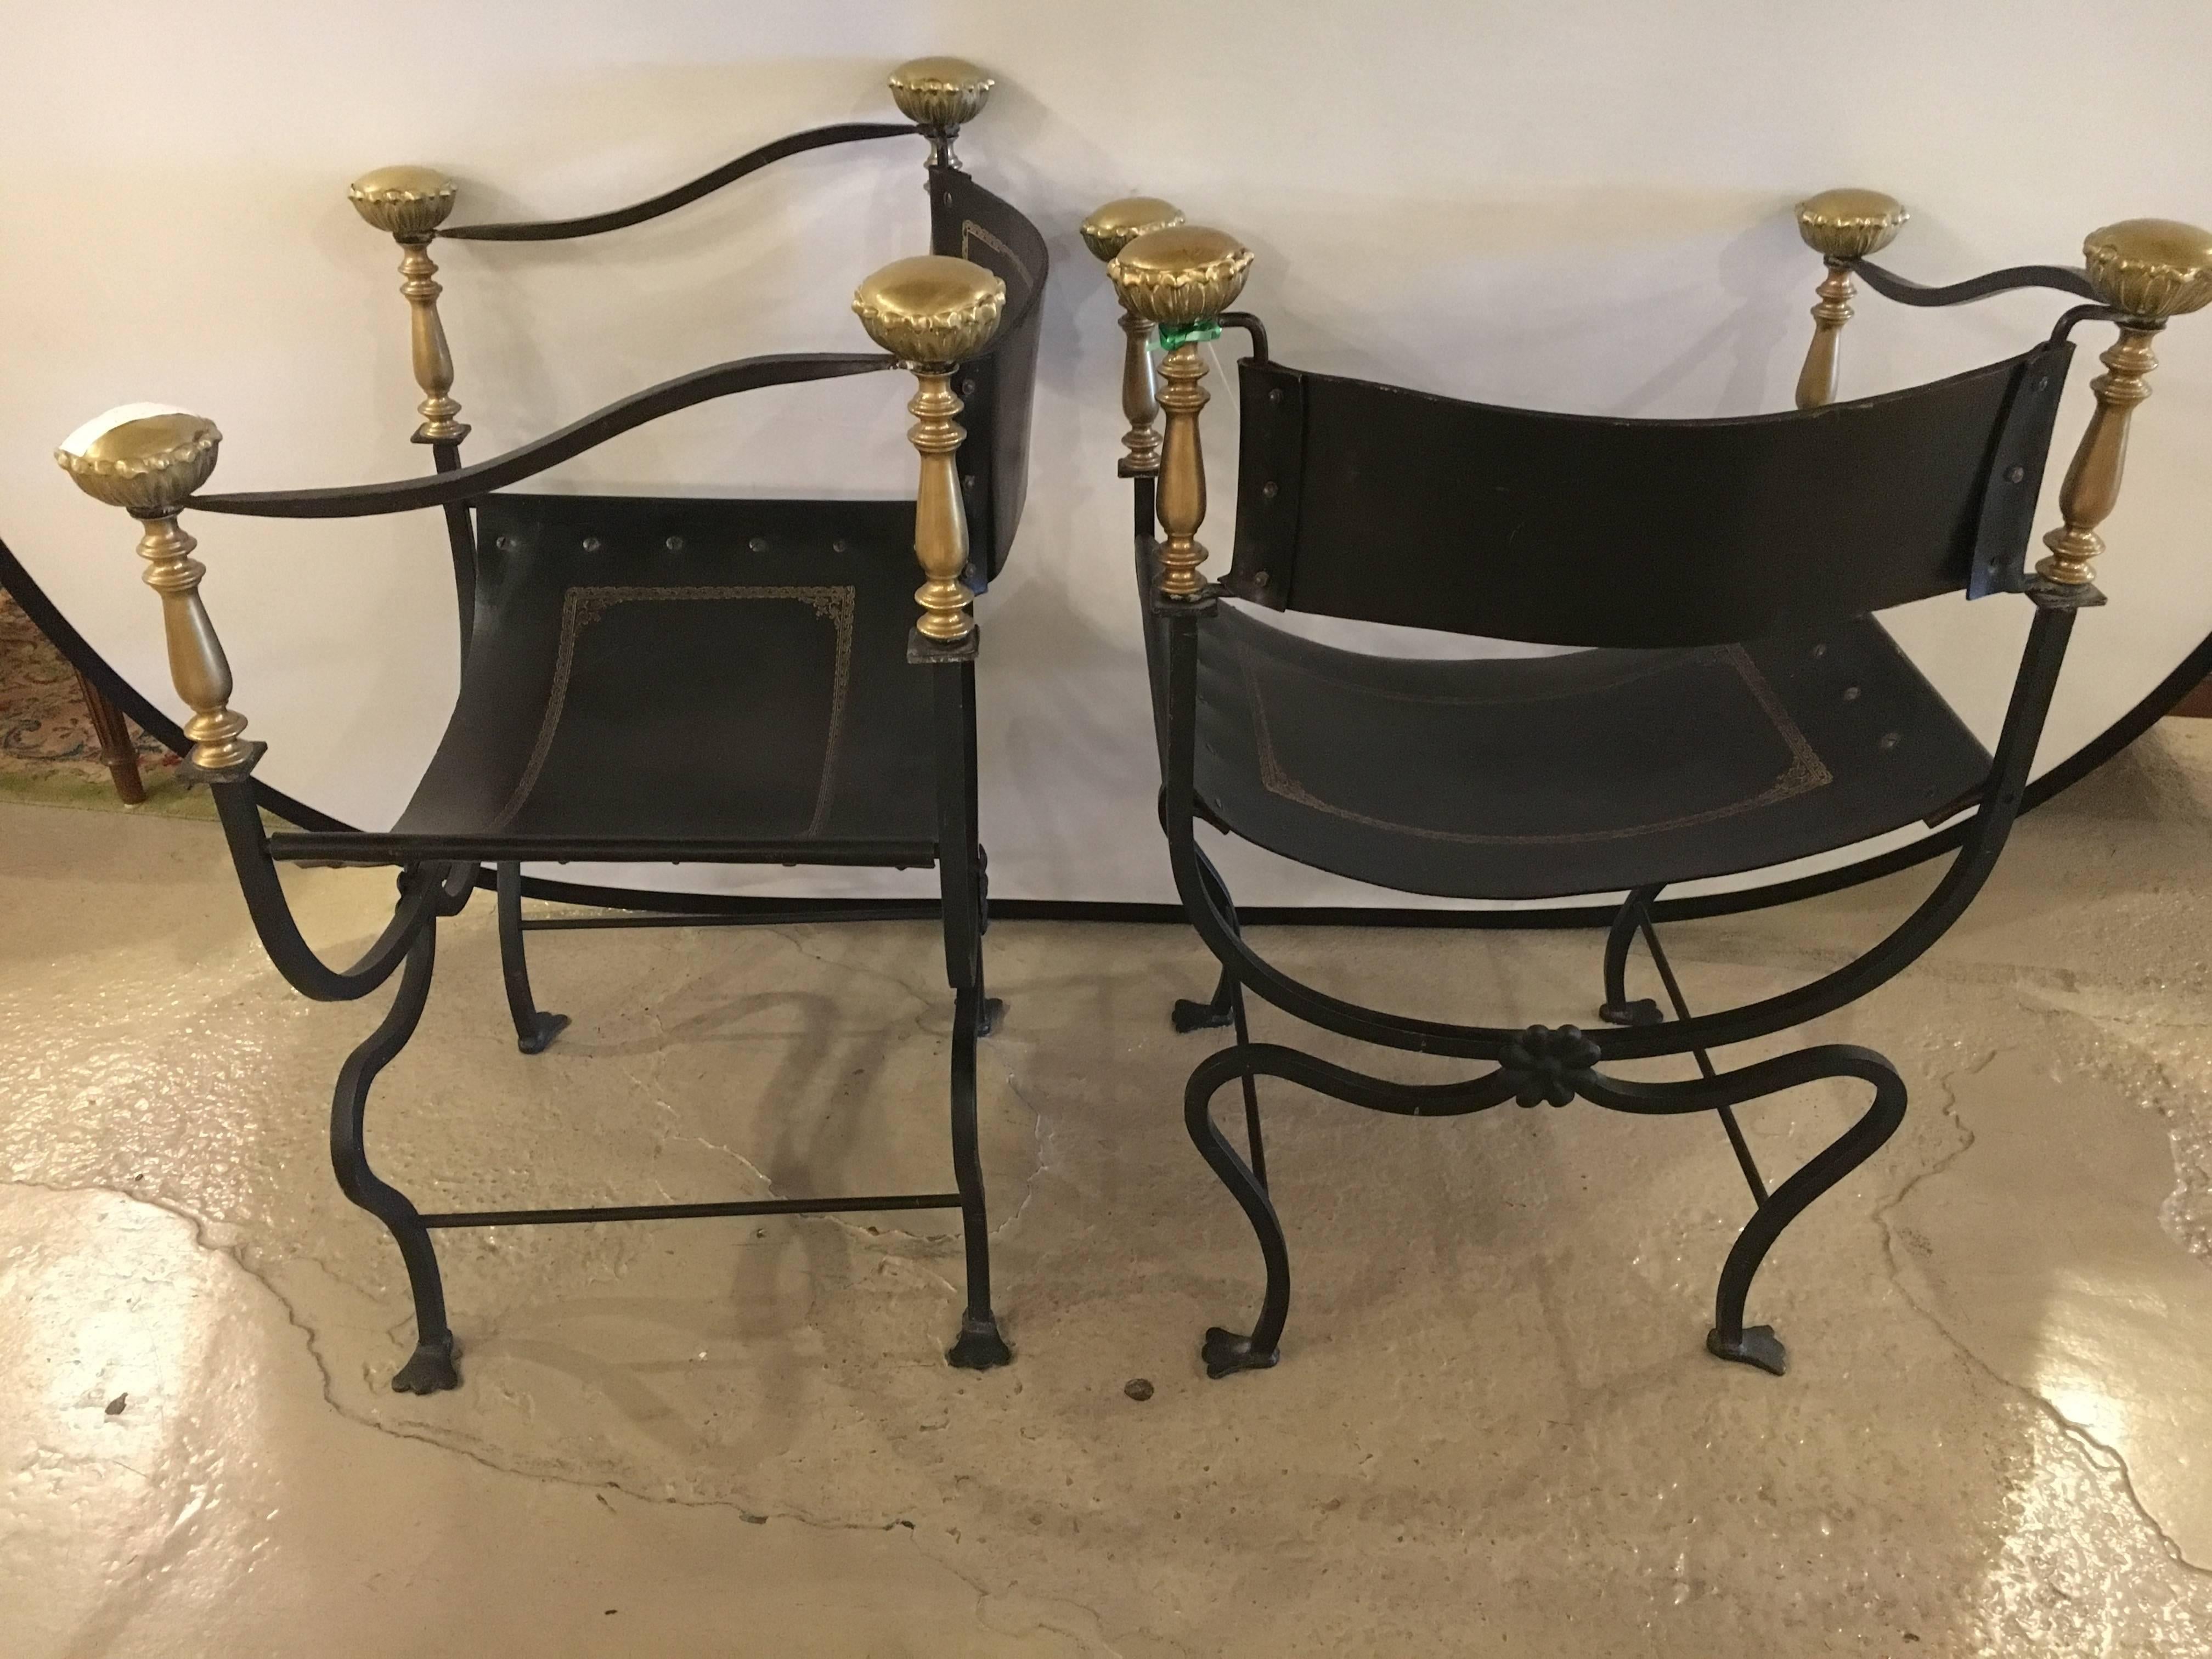 A pair of Jansen Curule Savonarola chairs. Each with a finely tooled leather seat and tooled leather backrest. The wrought Iron base having claw feet and leading to a pair of brass front and back posts. In fine condition.